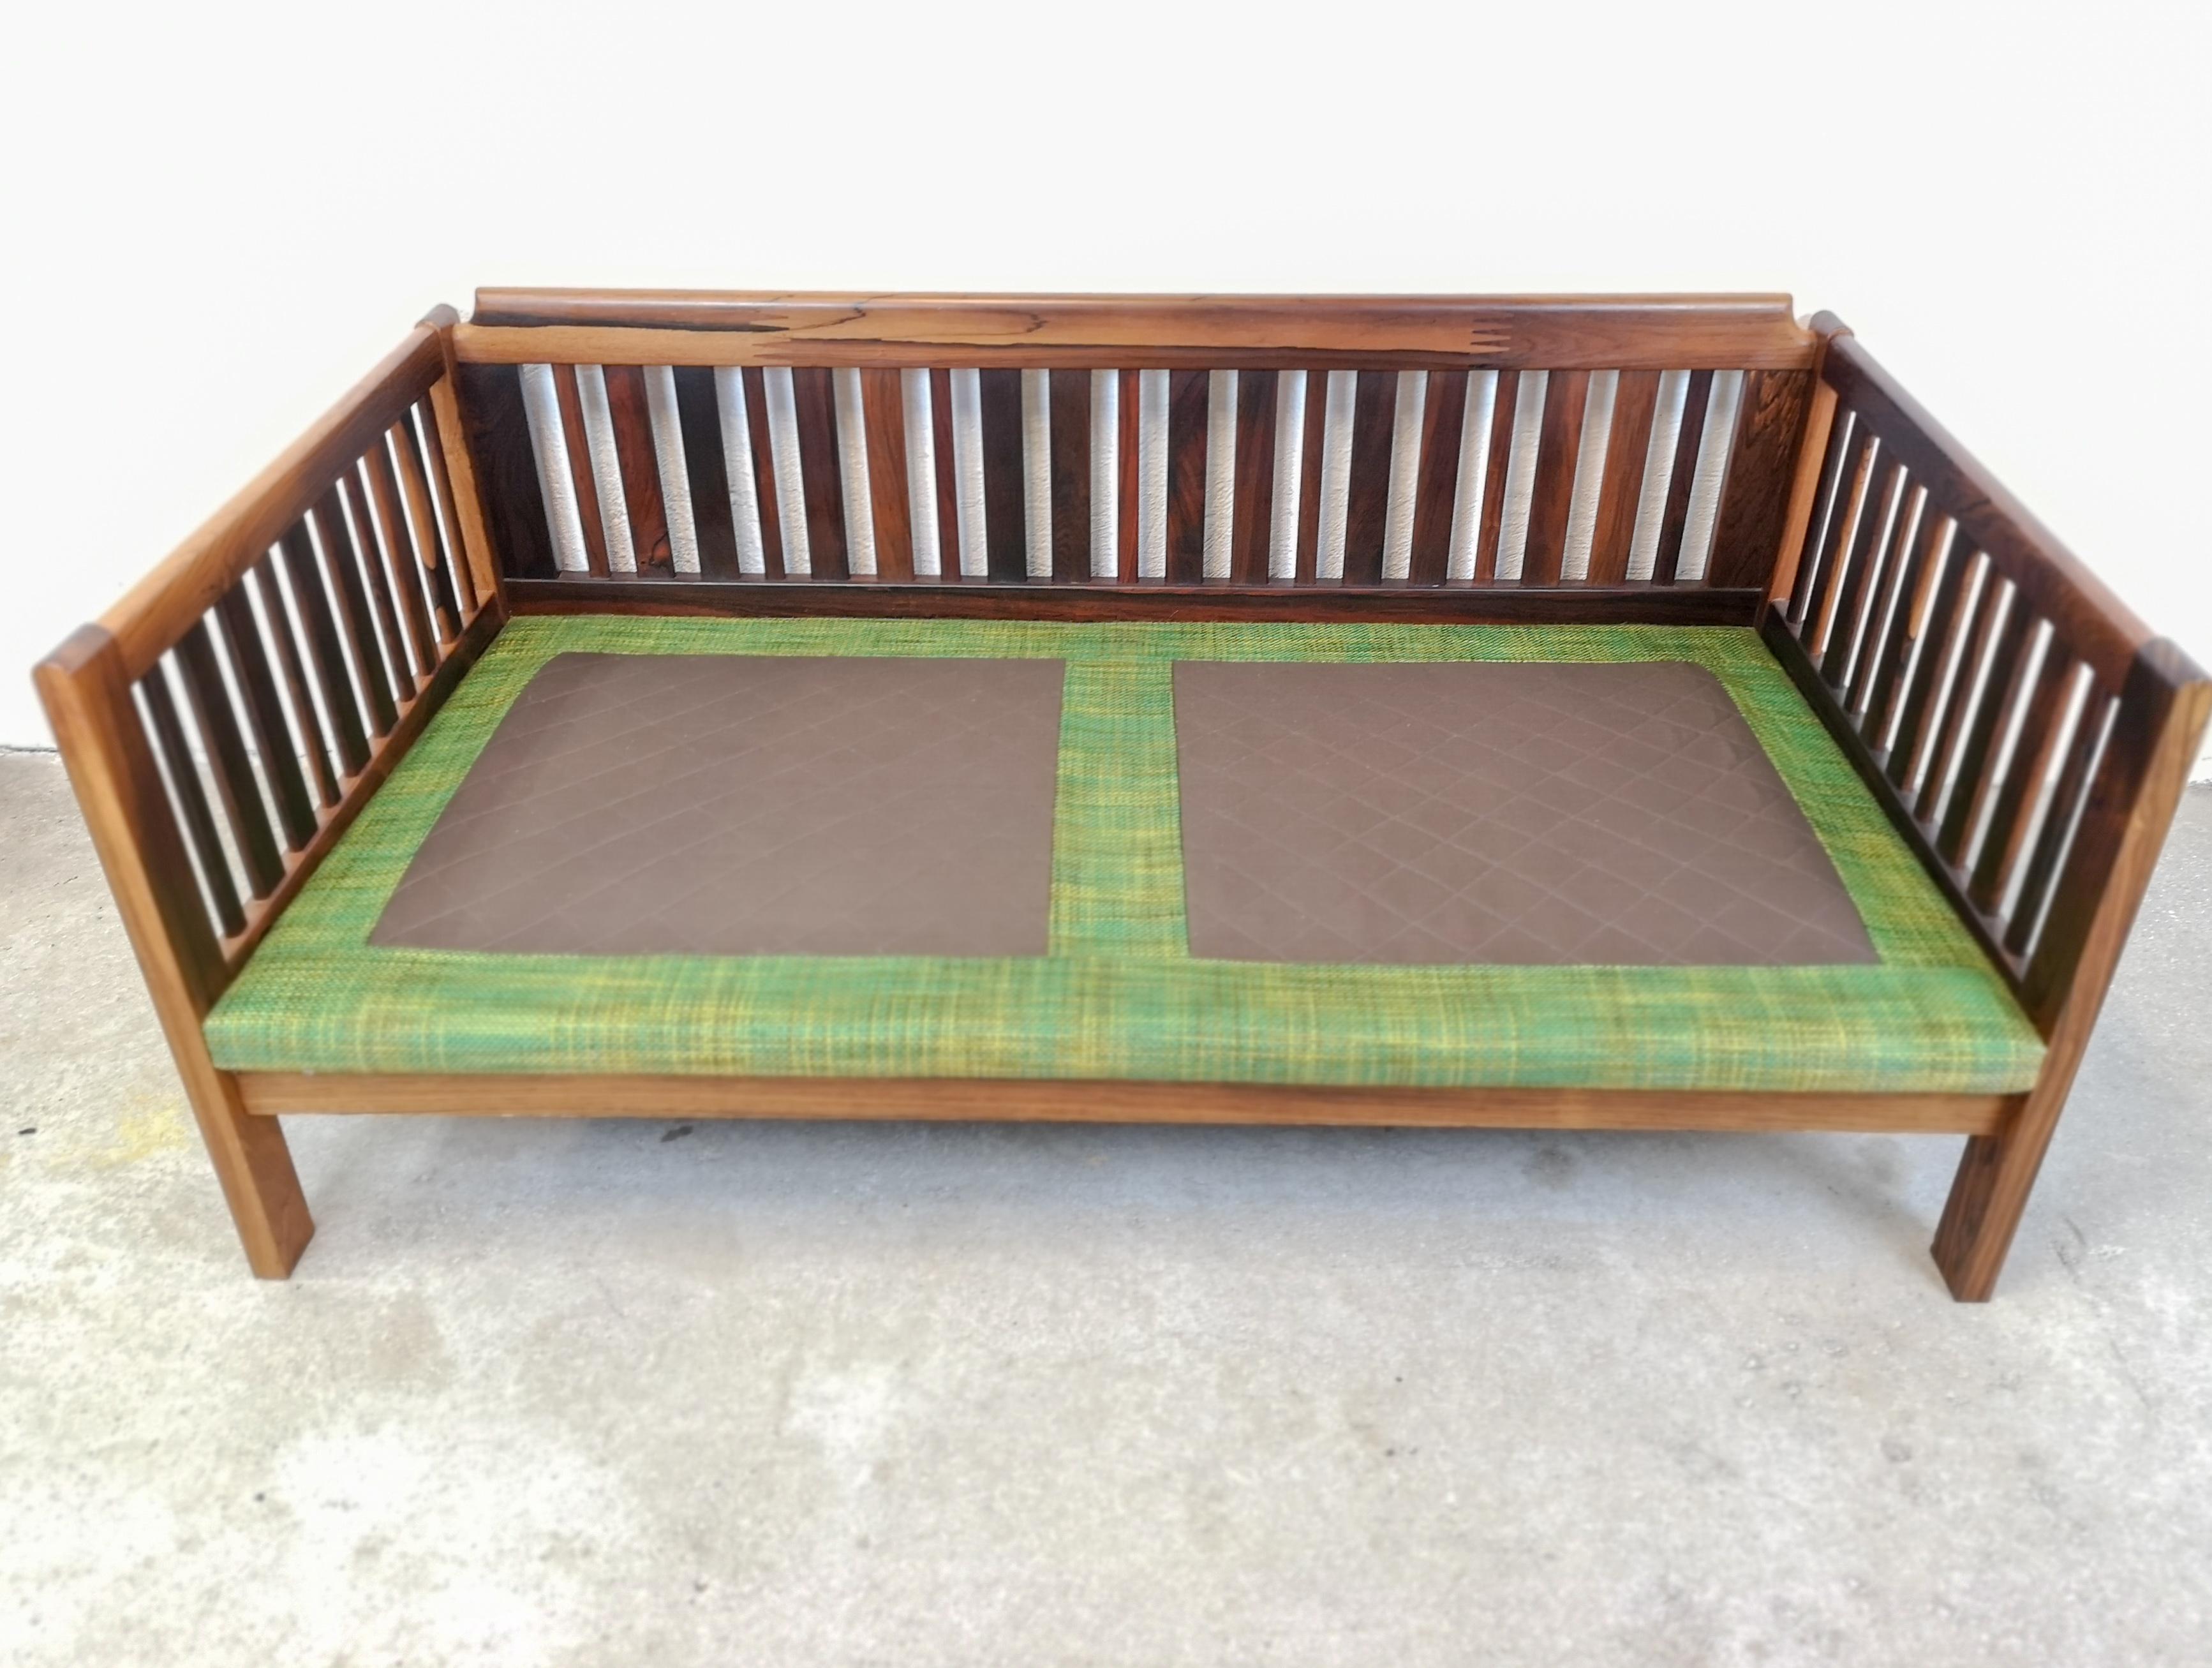 Midcentury Rosewood and Green Cushions Sofa 